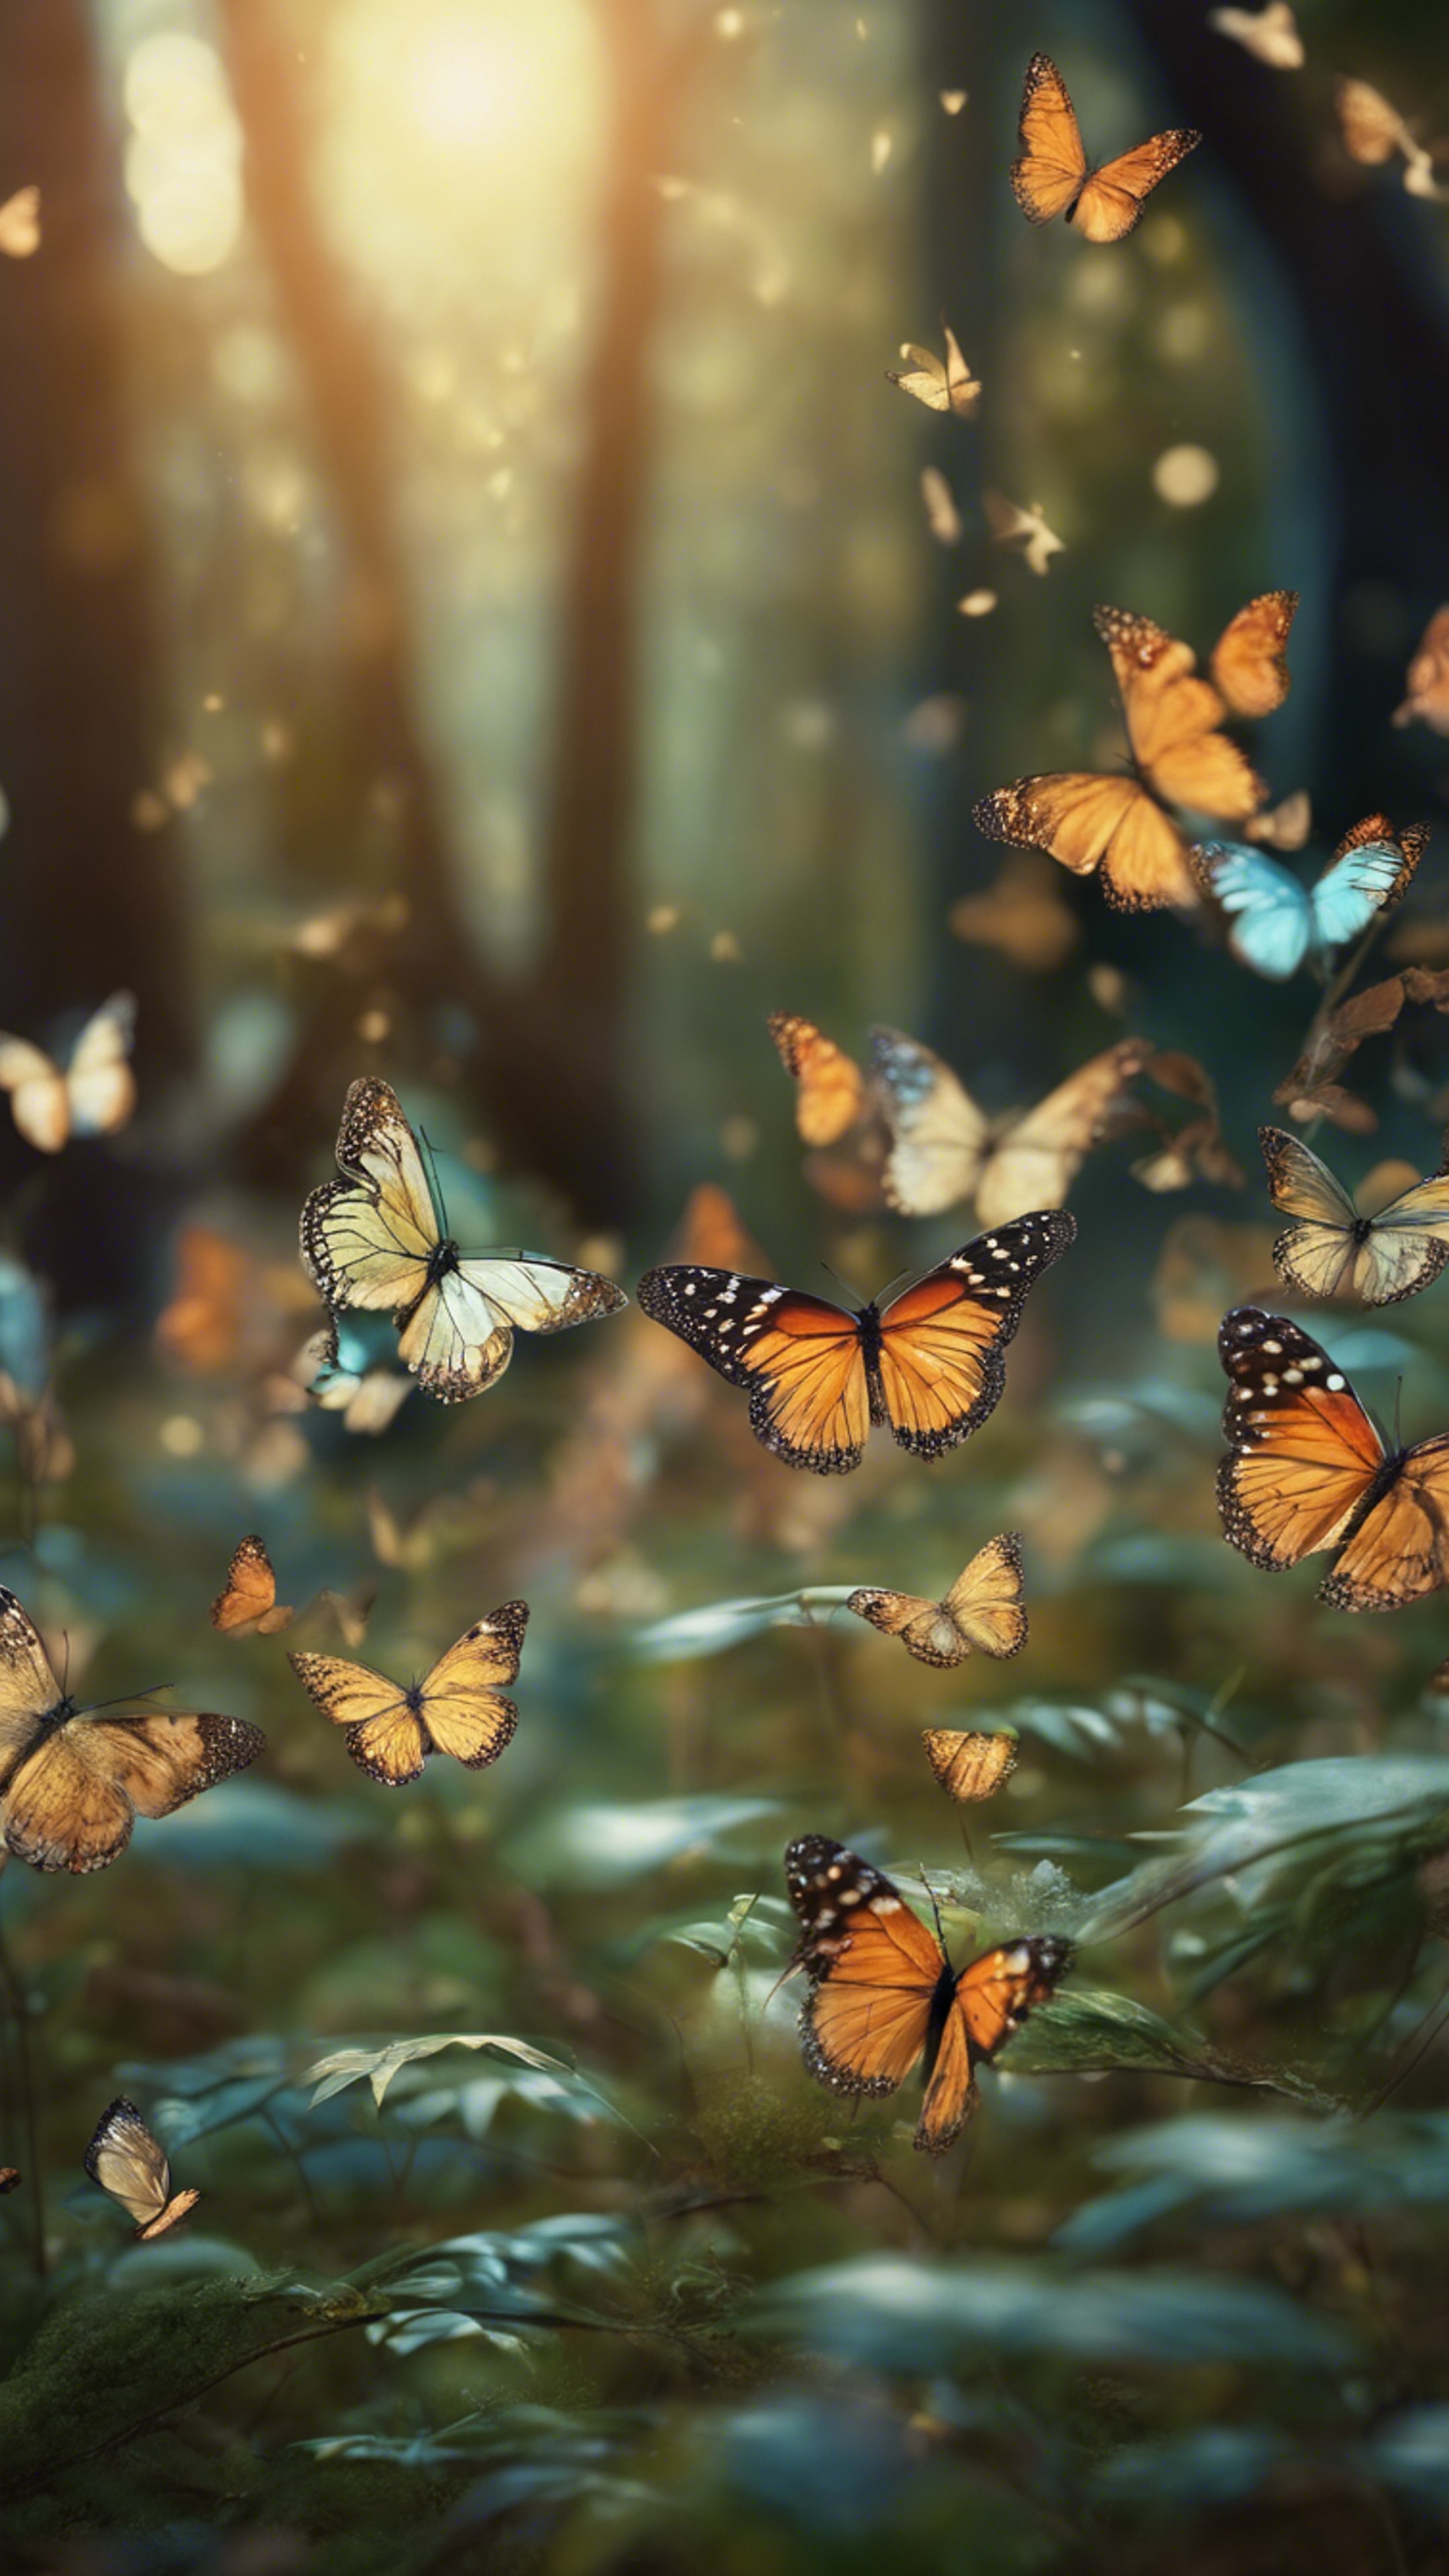 An ancient forest filled with thousands of fluttering butterflies, as envisioned in a dream. Wallpaper[81dfb28e918b4e2785cf]